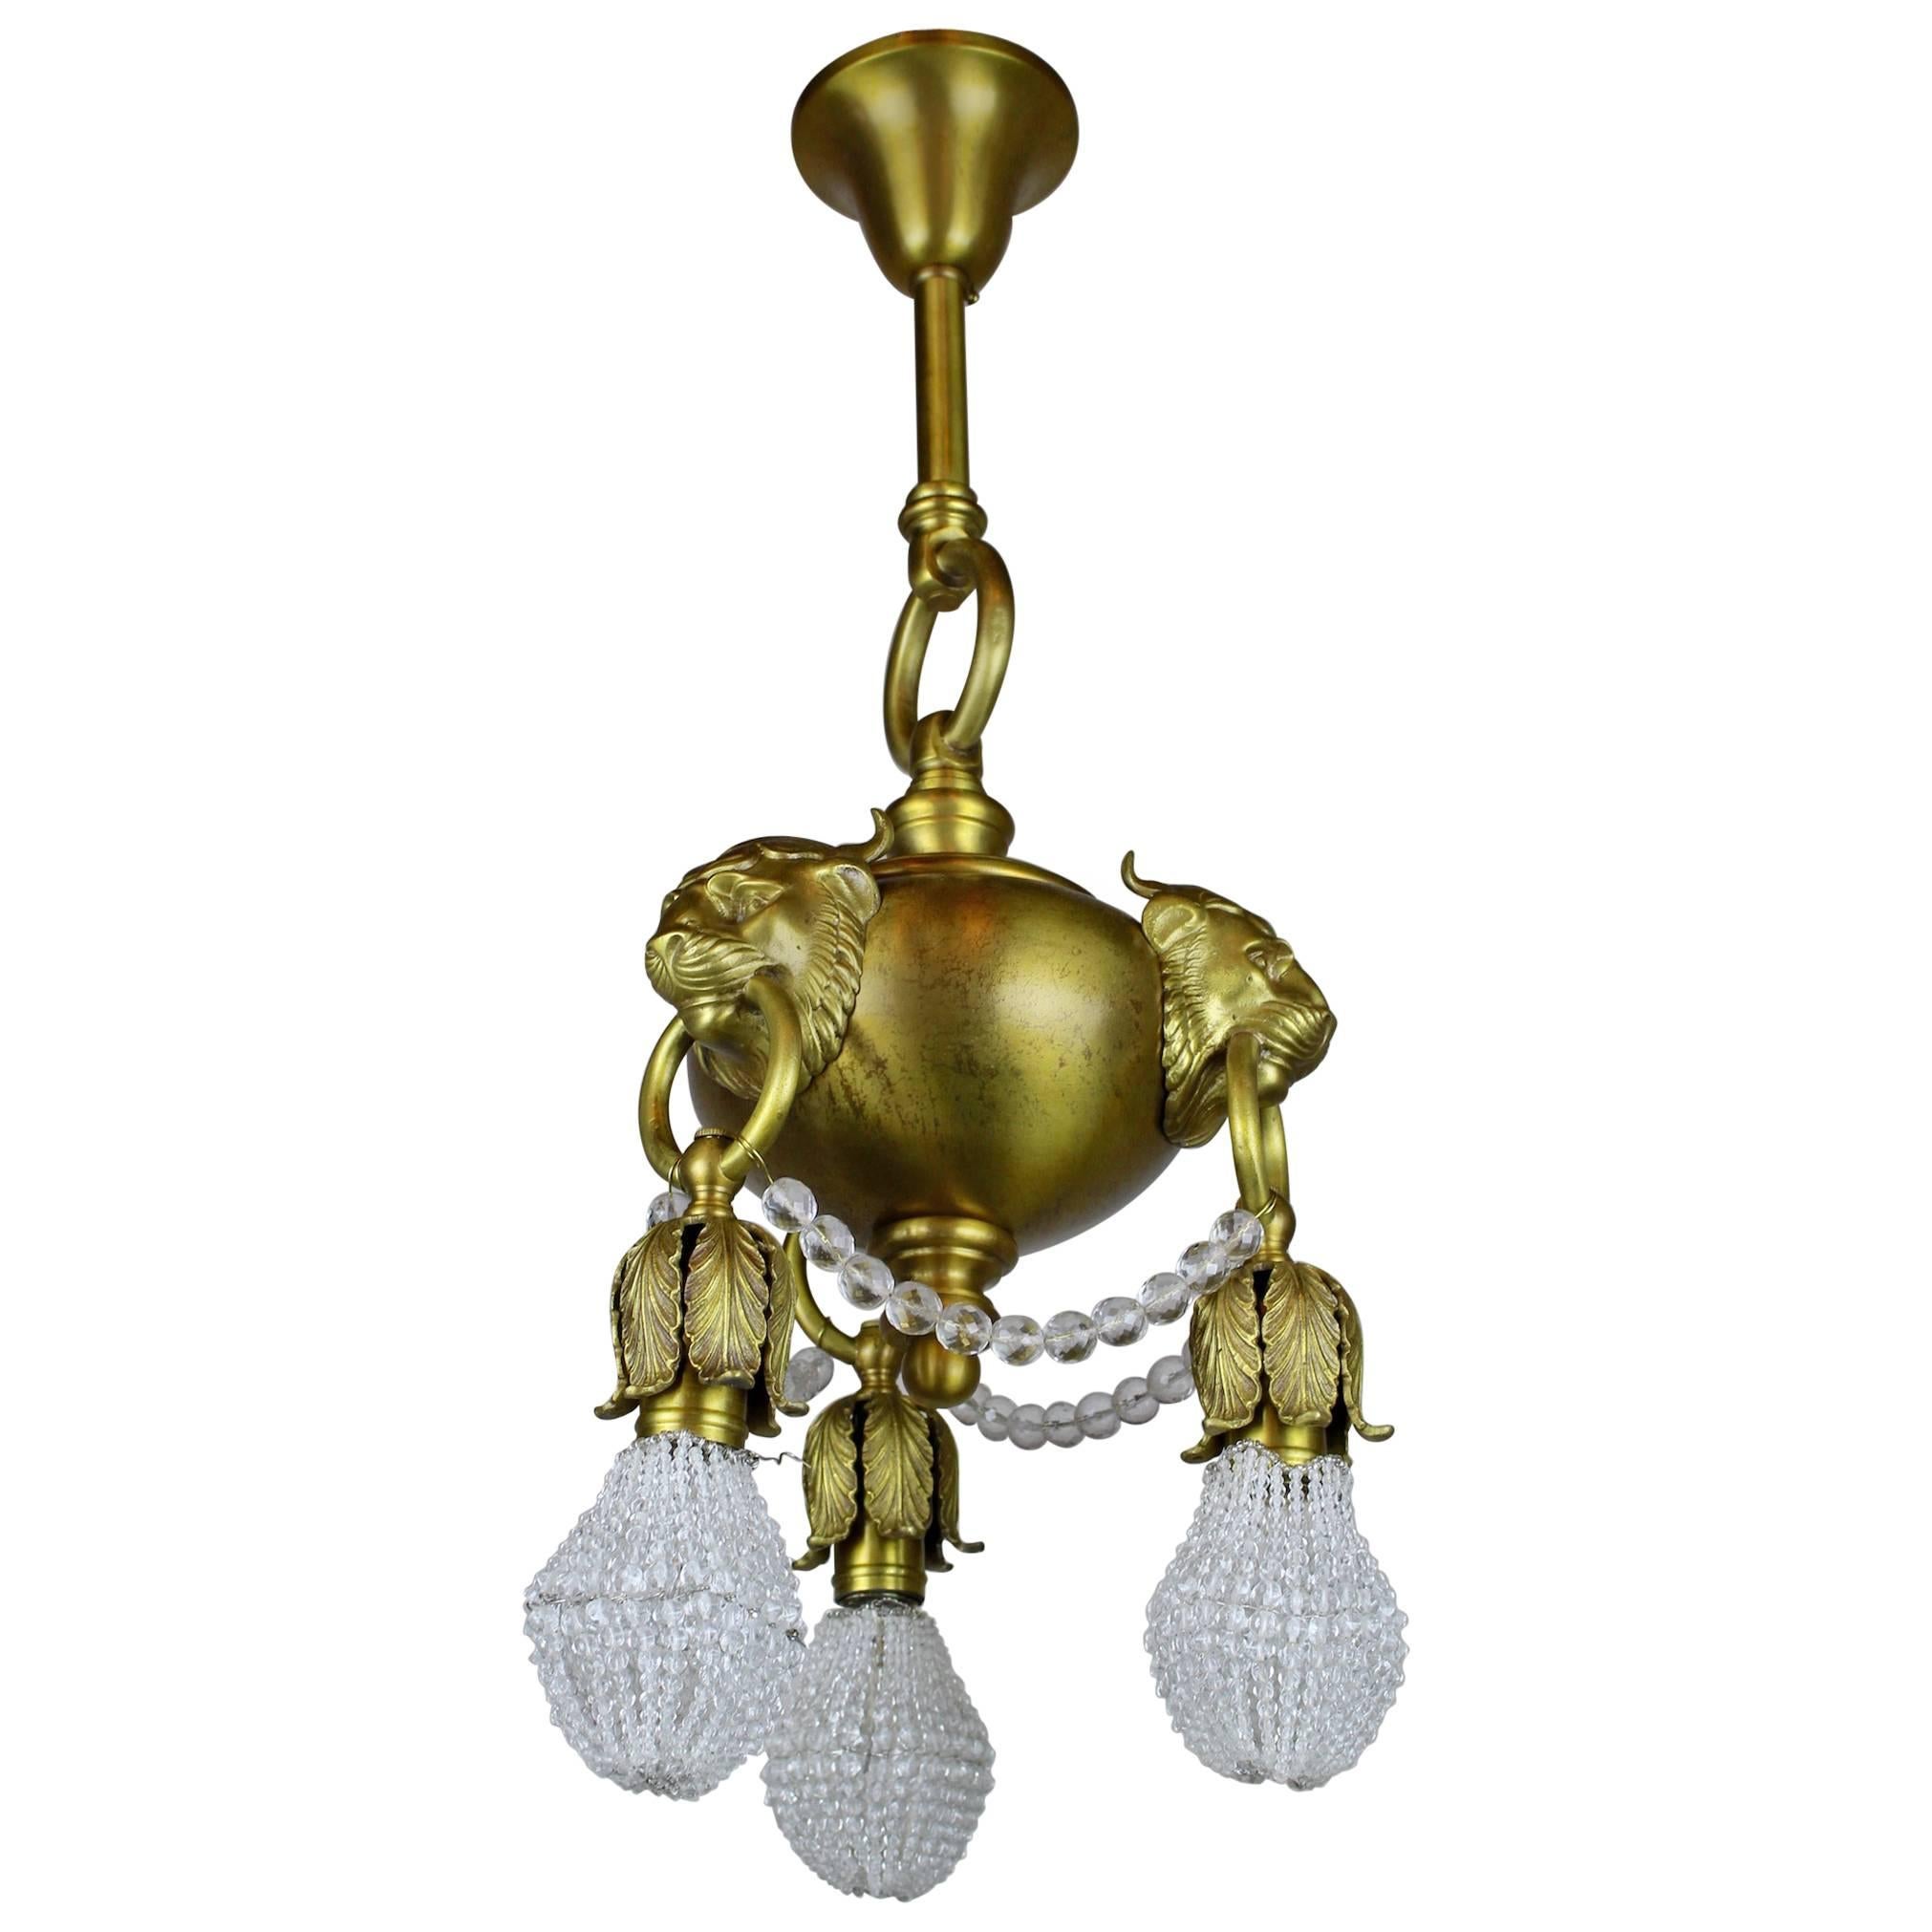 Neoclassical Revival "Lion Mask" Fixture with Crystal For Sale